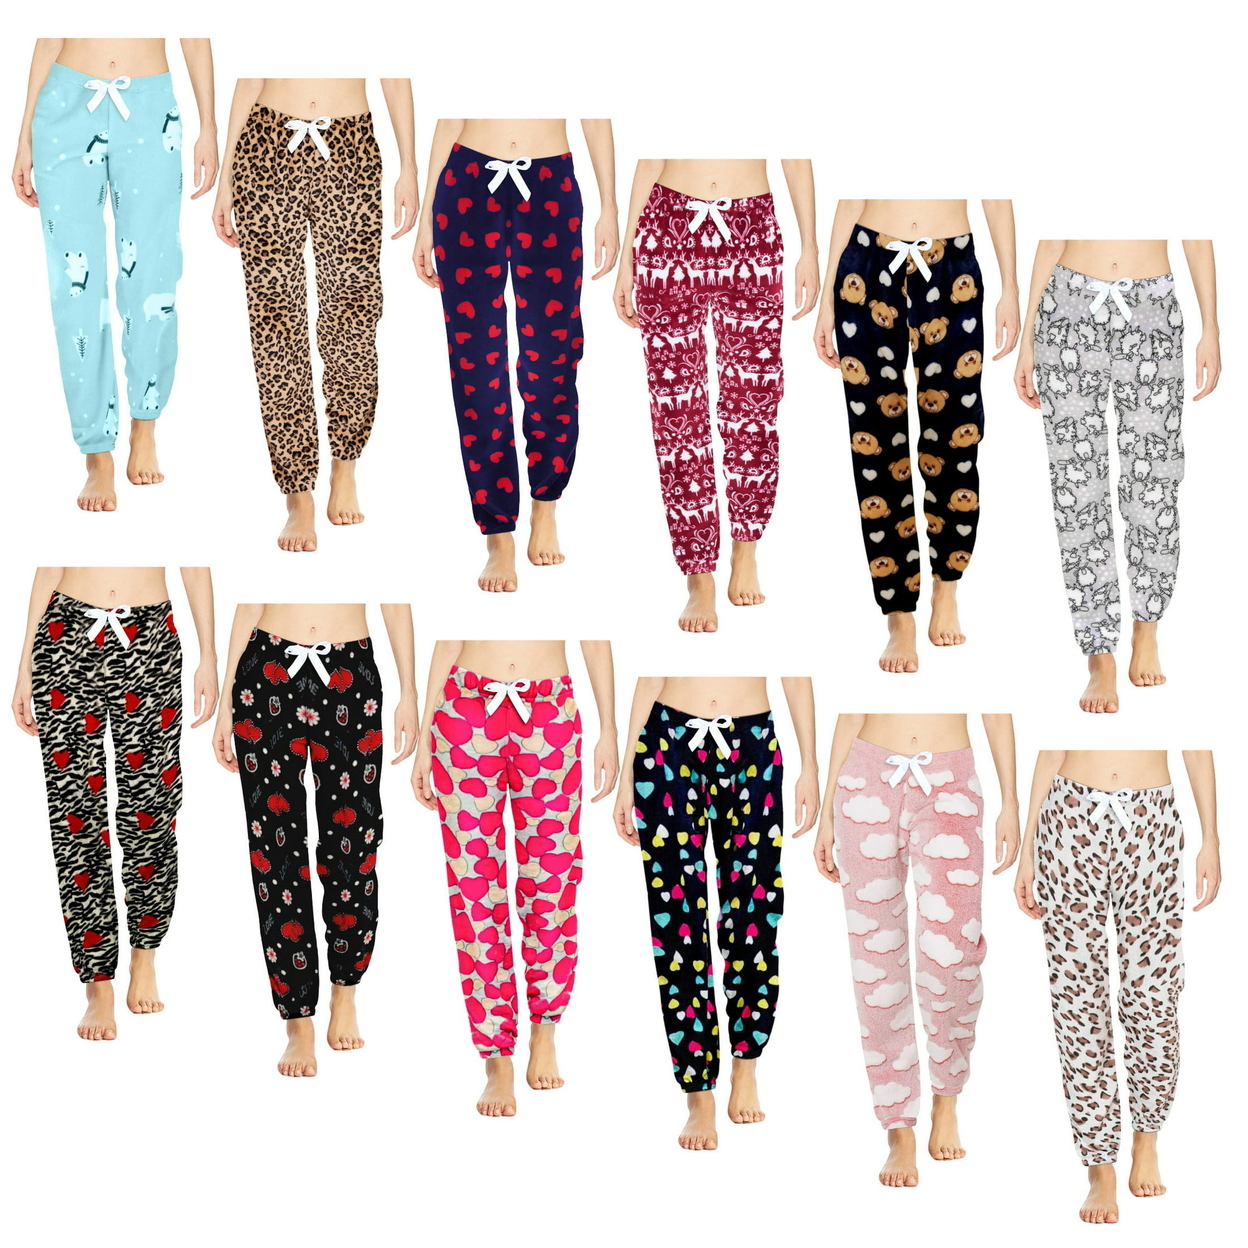 Multi-Pack: Women's Printed Ultra-Soft Comfy Stretch Micro-Fleece Pajama Lounge Pants - 3-pack, Animal, X-large